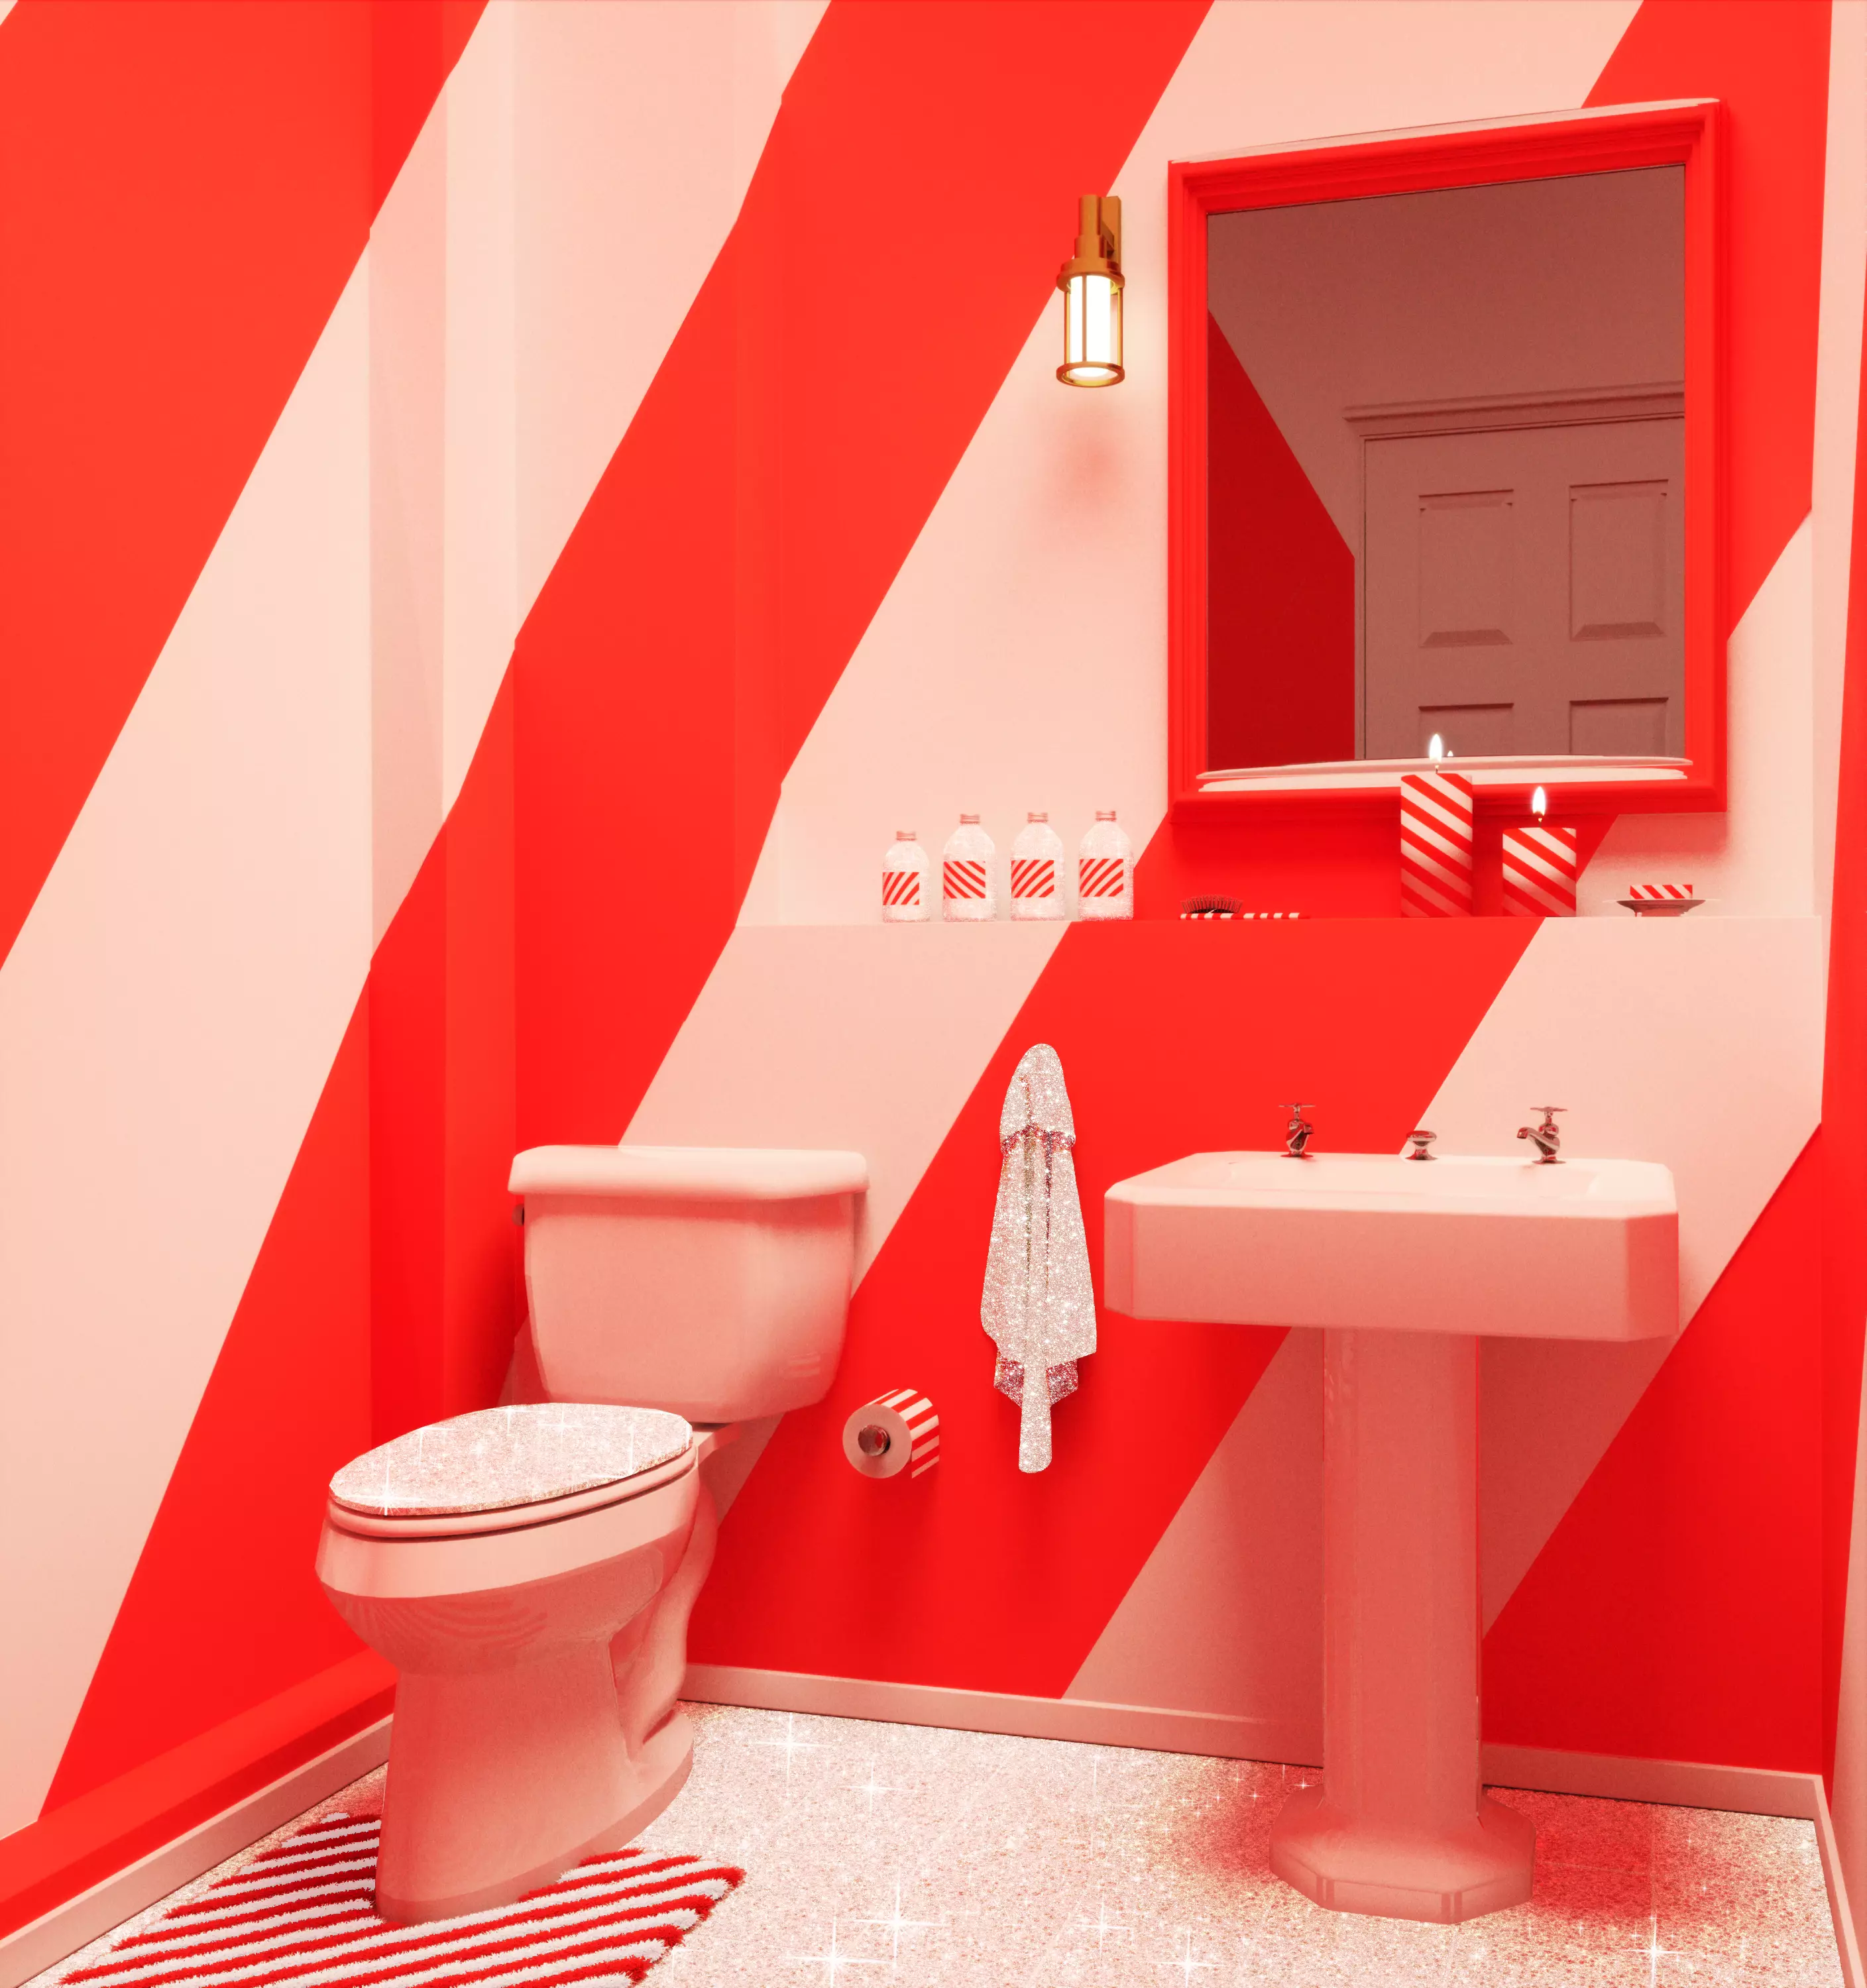 The candy cane-inspired bathroom is quite a feature, too (